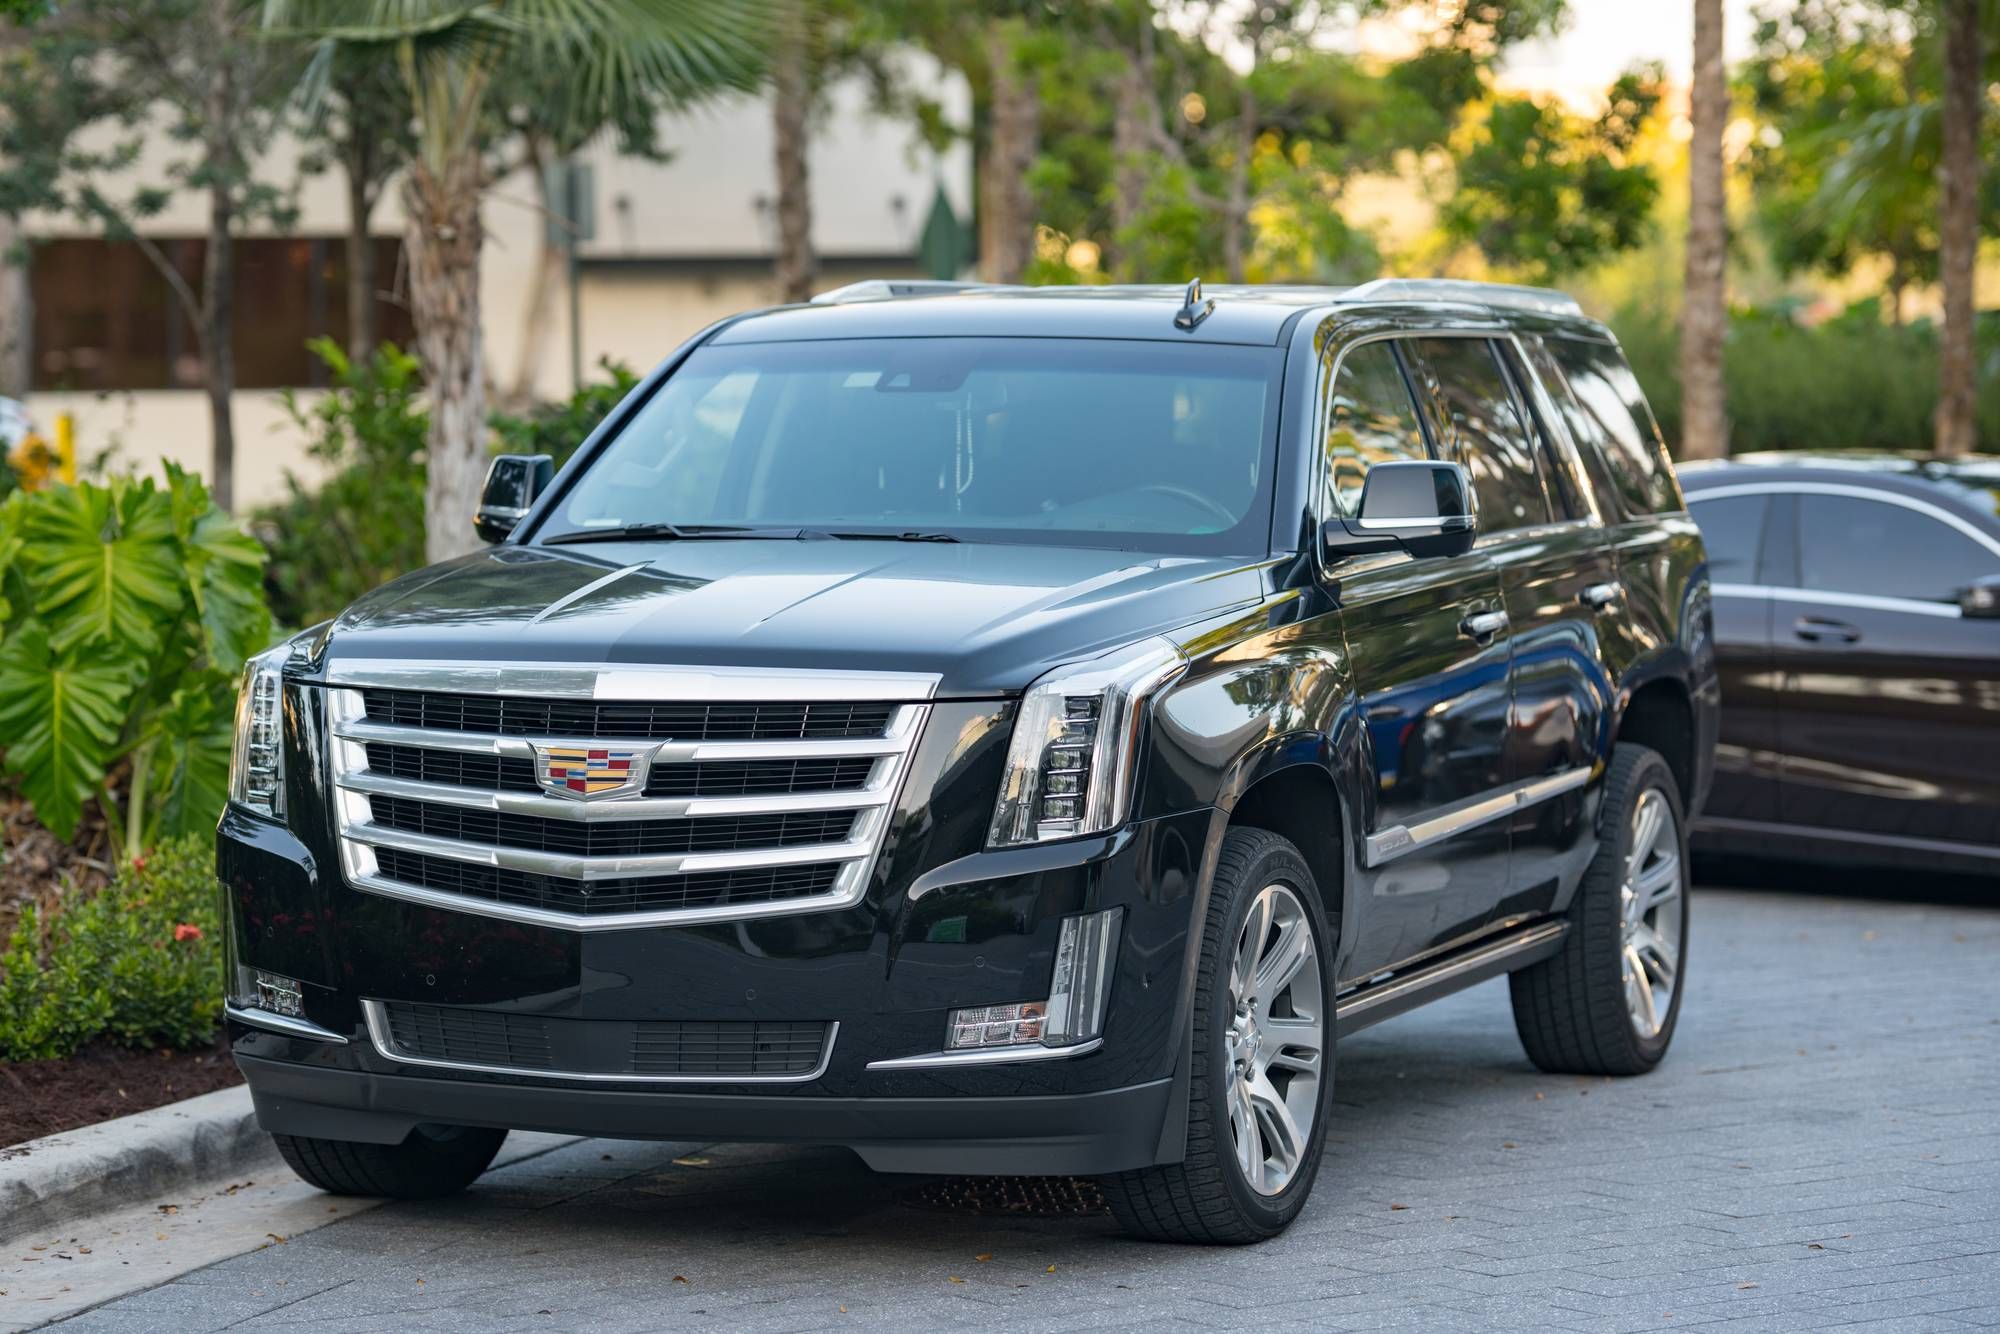 Man claims Escalade electrical defects in lawsuit against GM